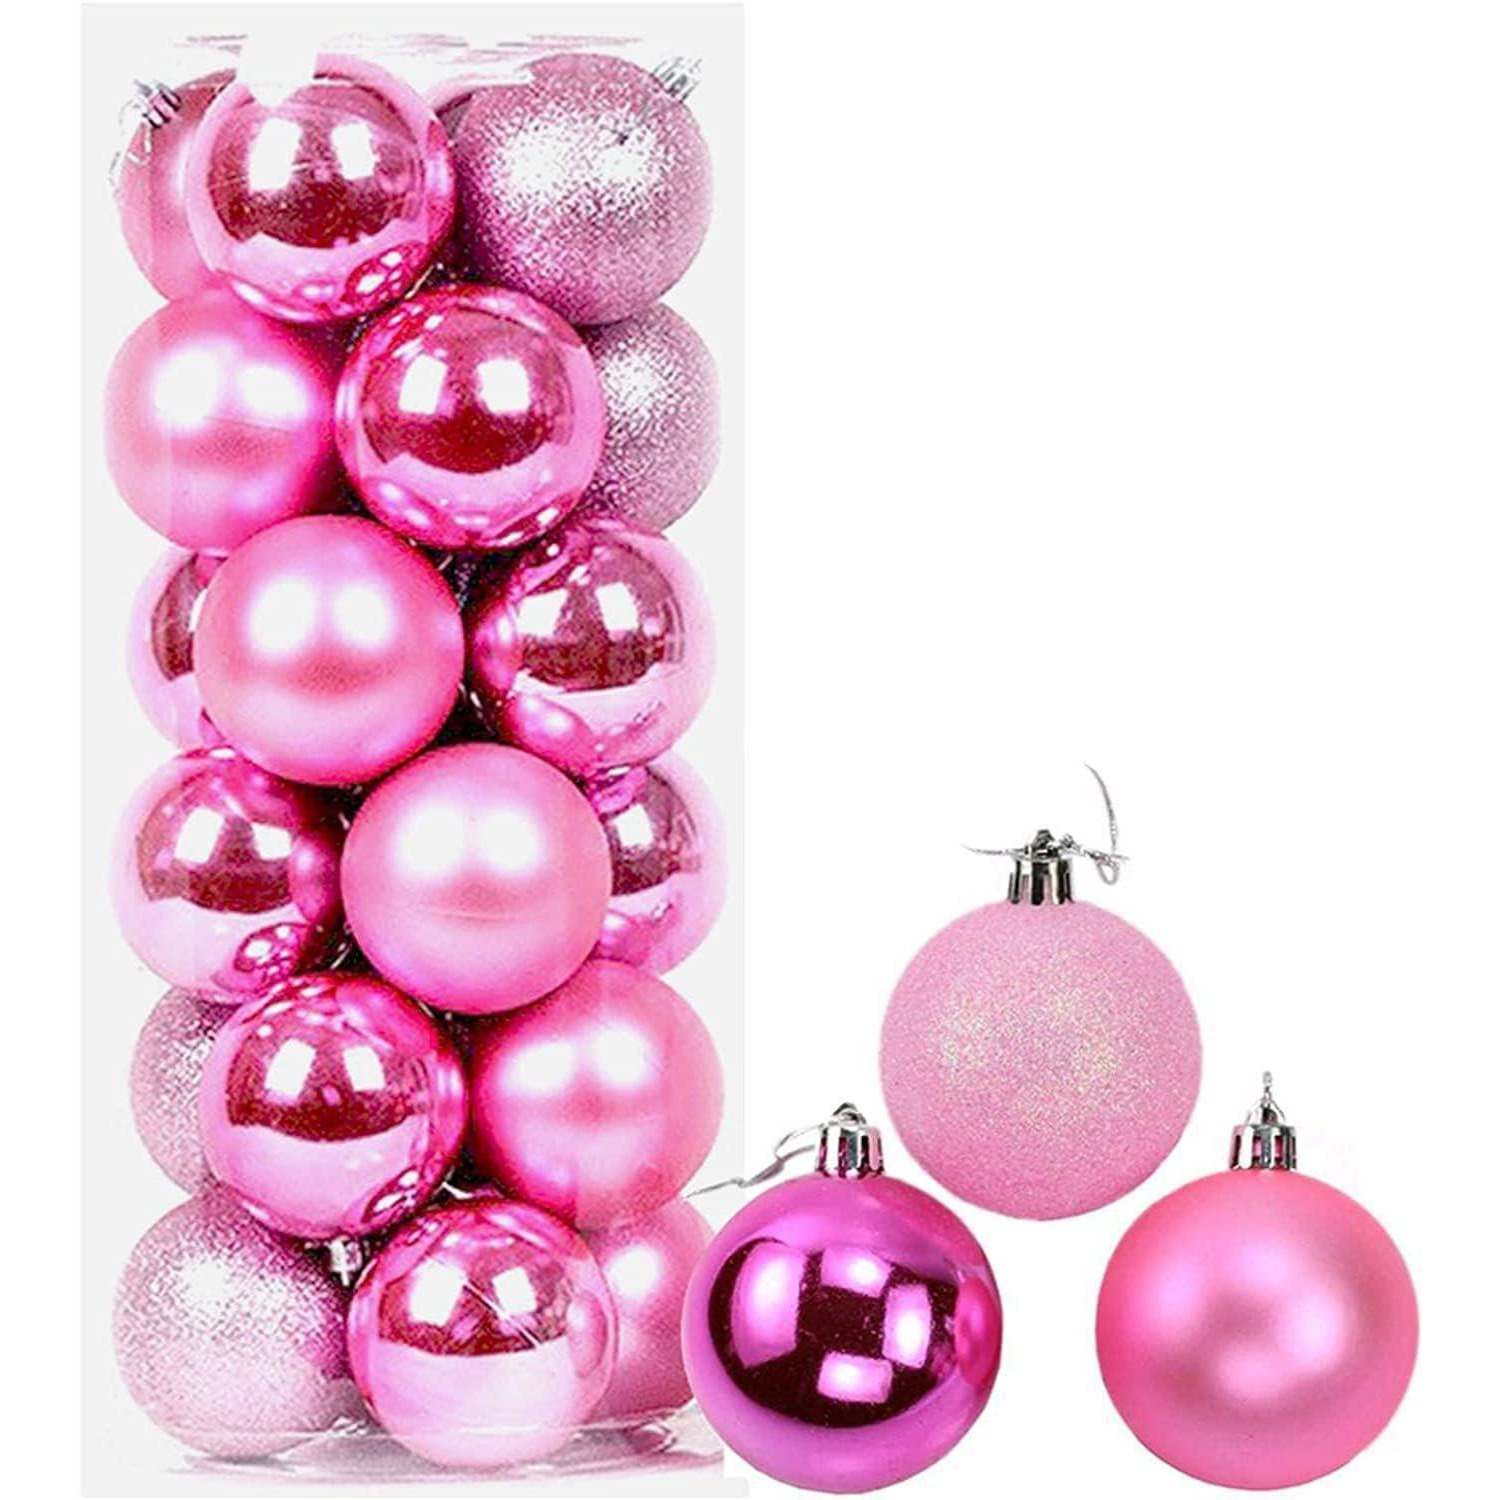 60mm/6Pcs Christmas Baubles Shatterproof Pink,Tree Decorations - image 1